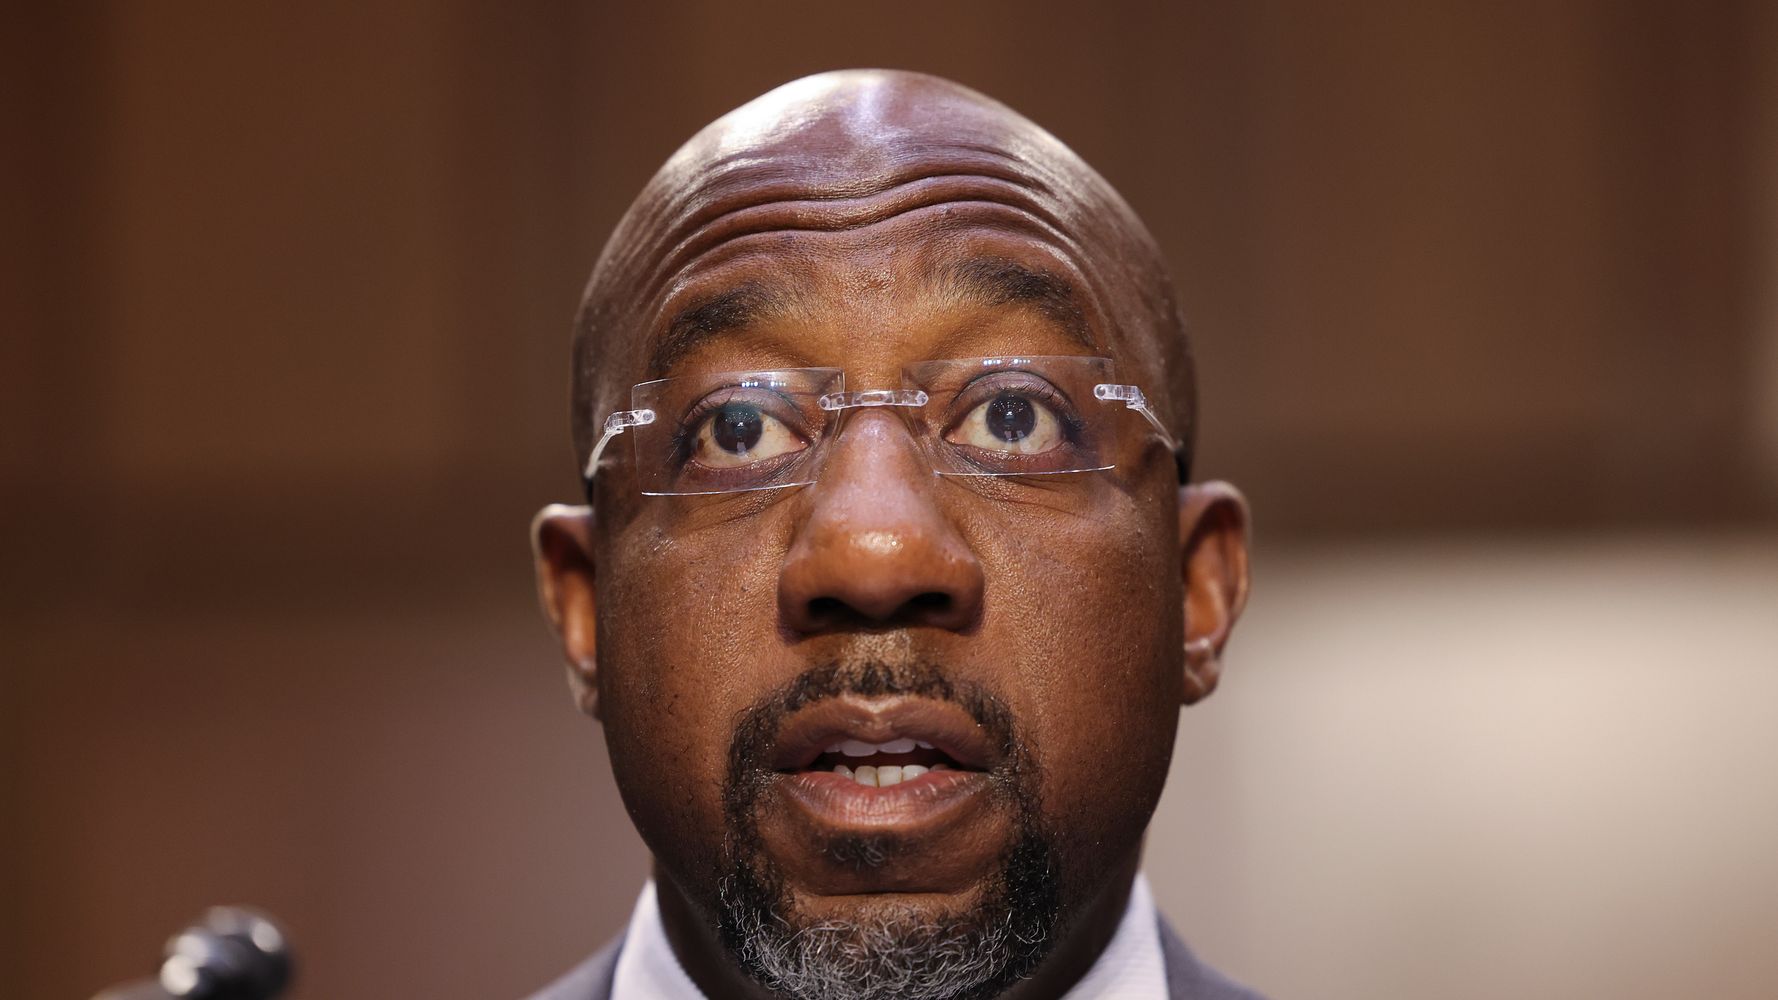 'A Defining Historical Moment': Raphael Warnock On The GOP's Blockade Of Jan. 6 Commission